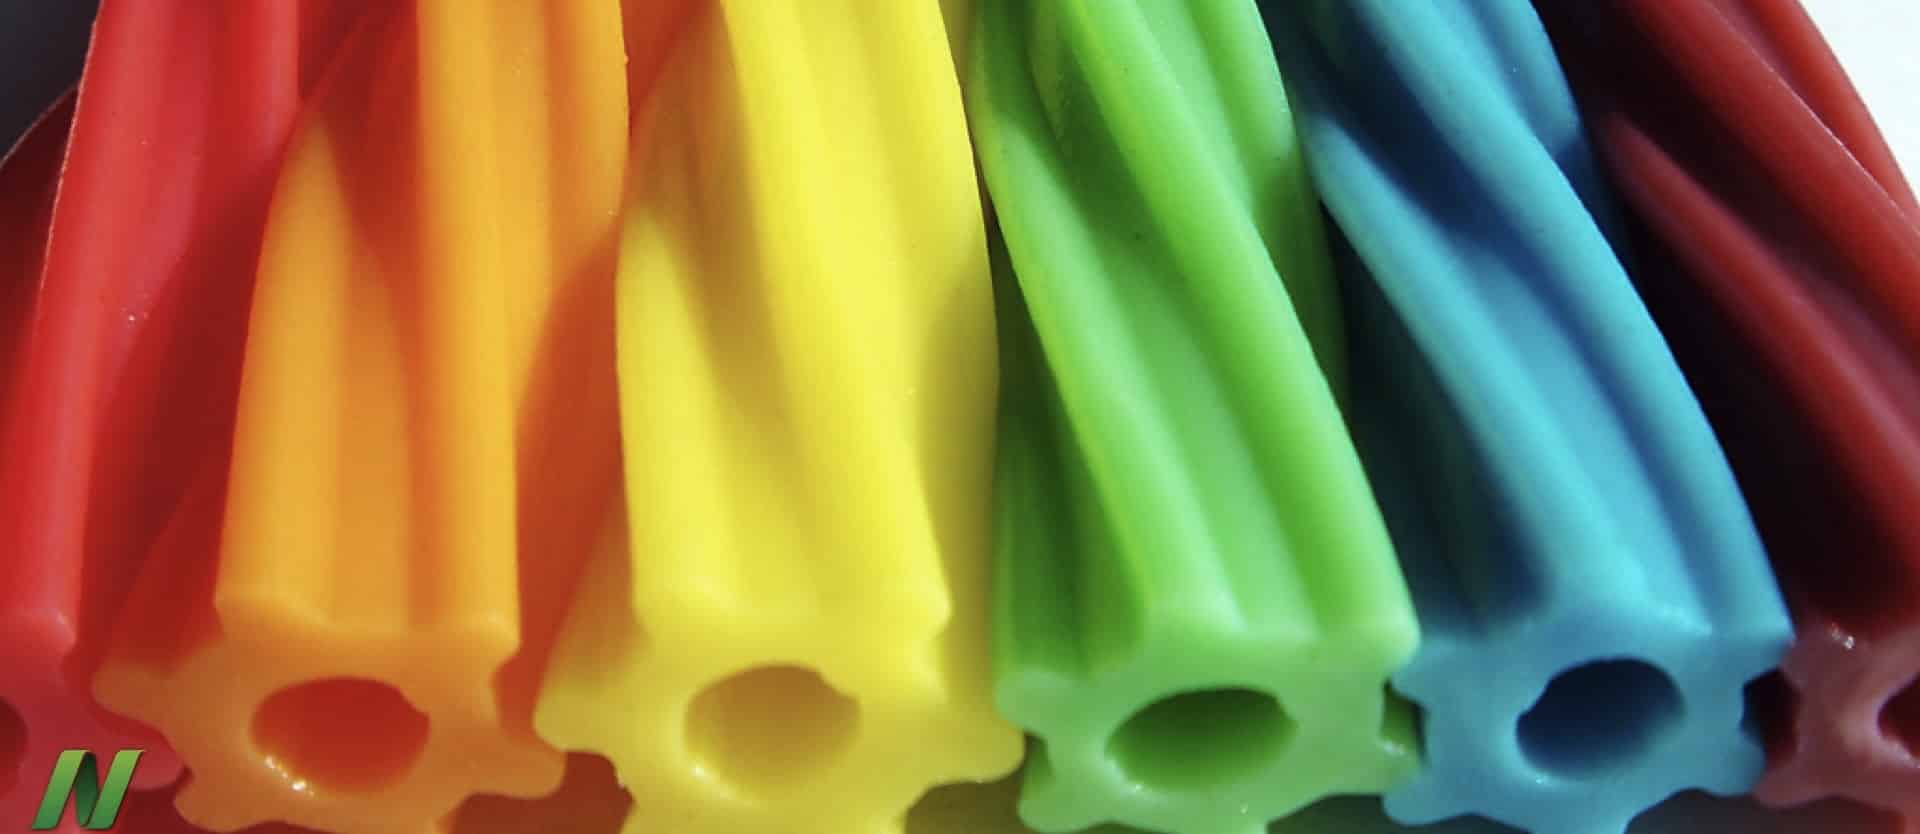 Are Artificial Colors Bad for You?